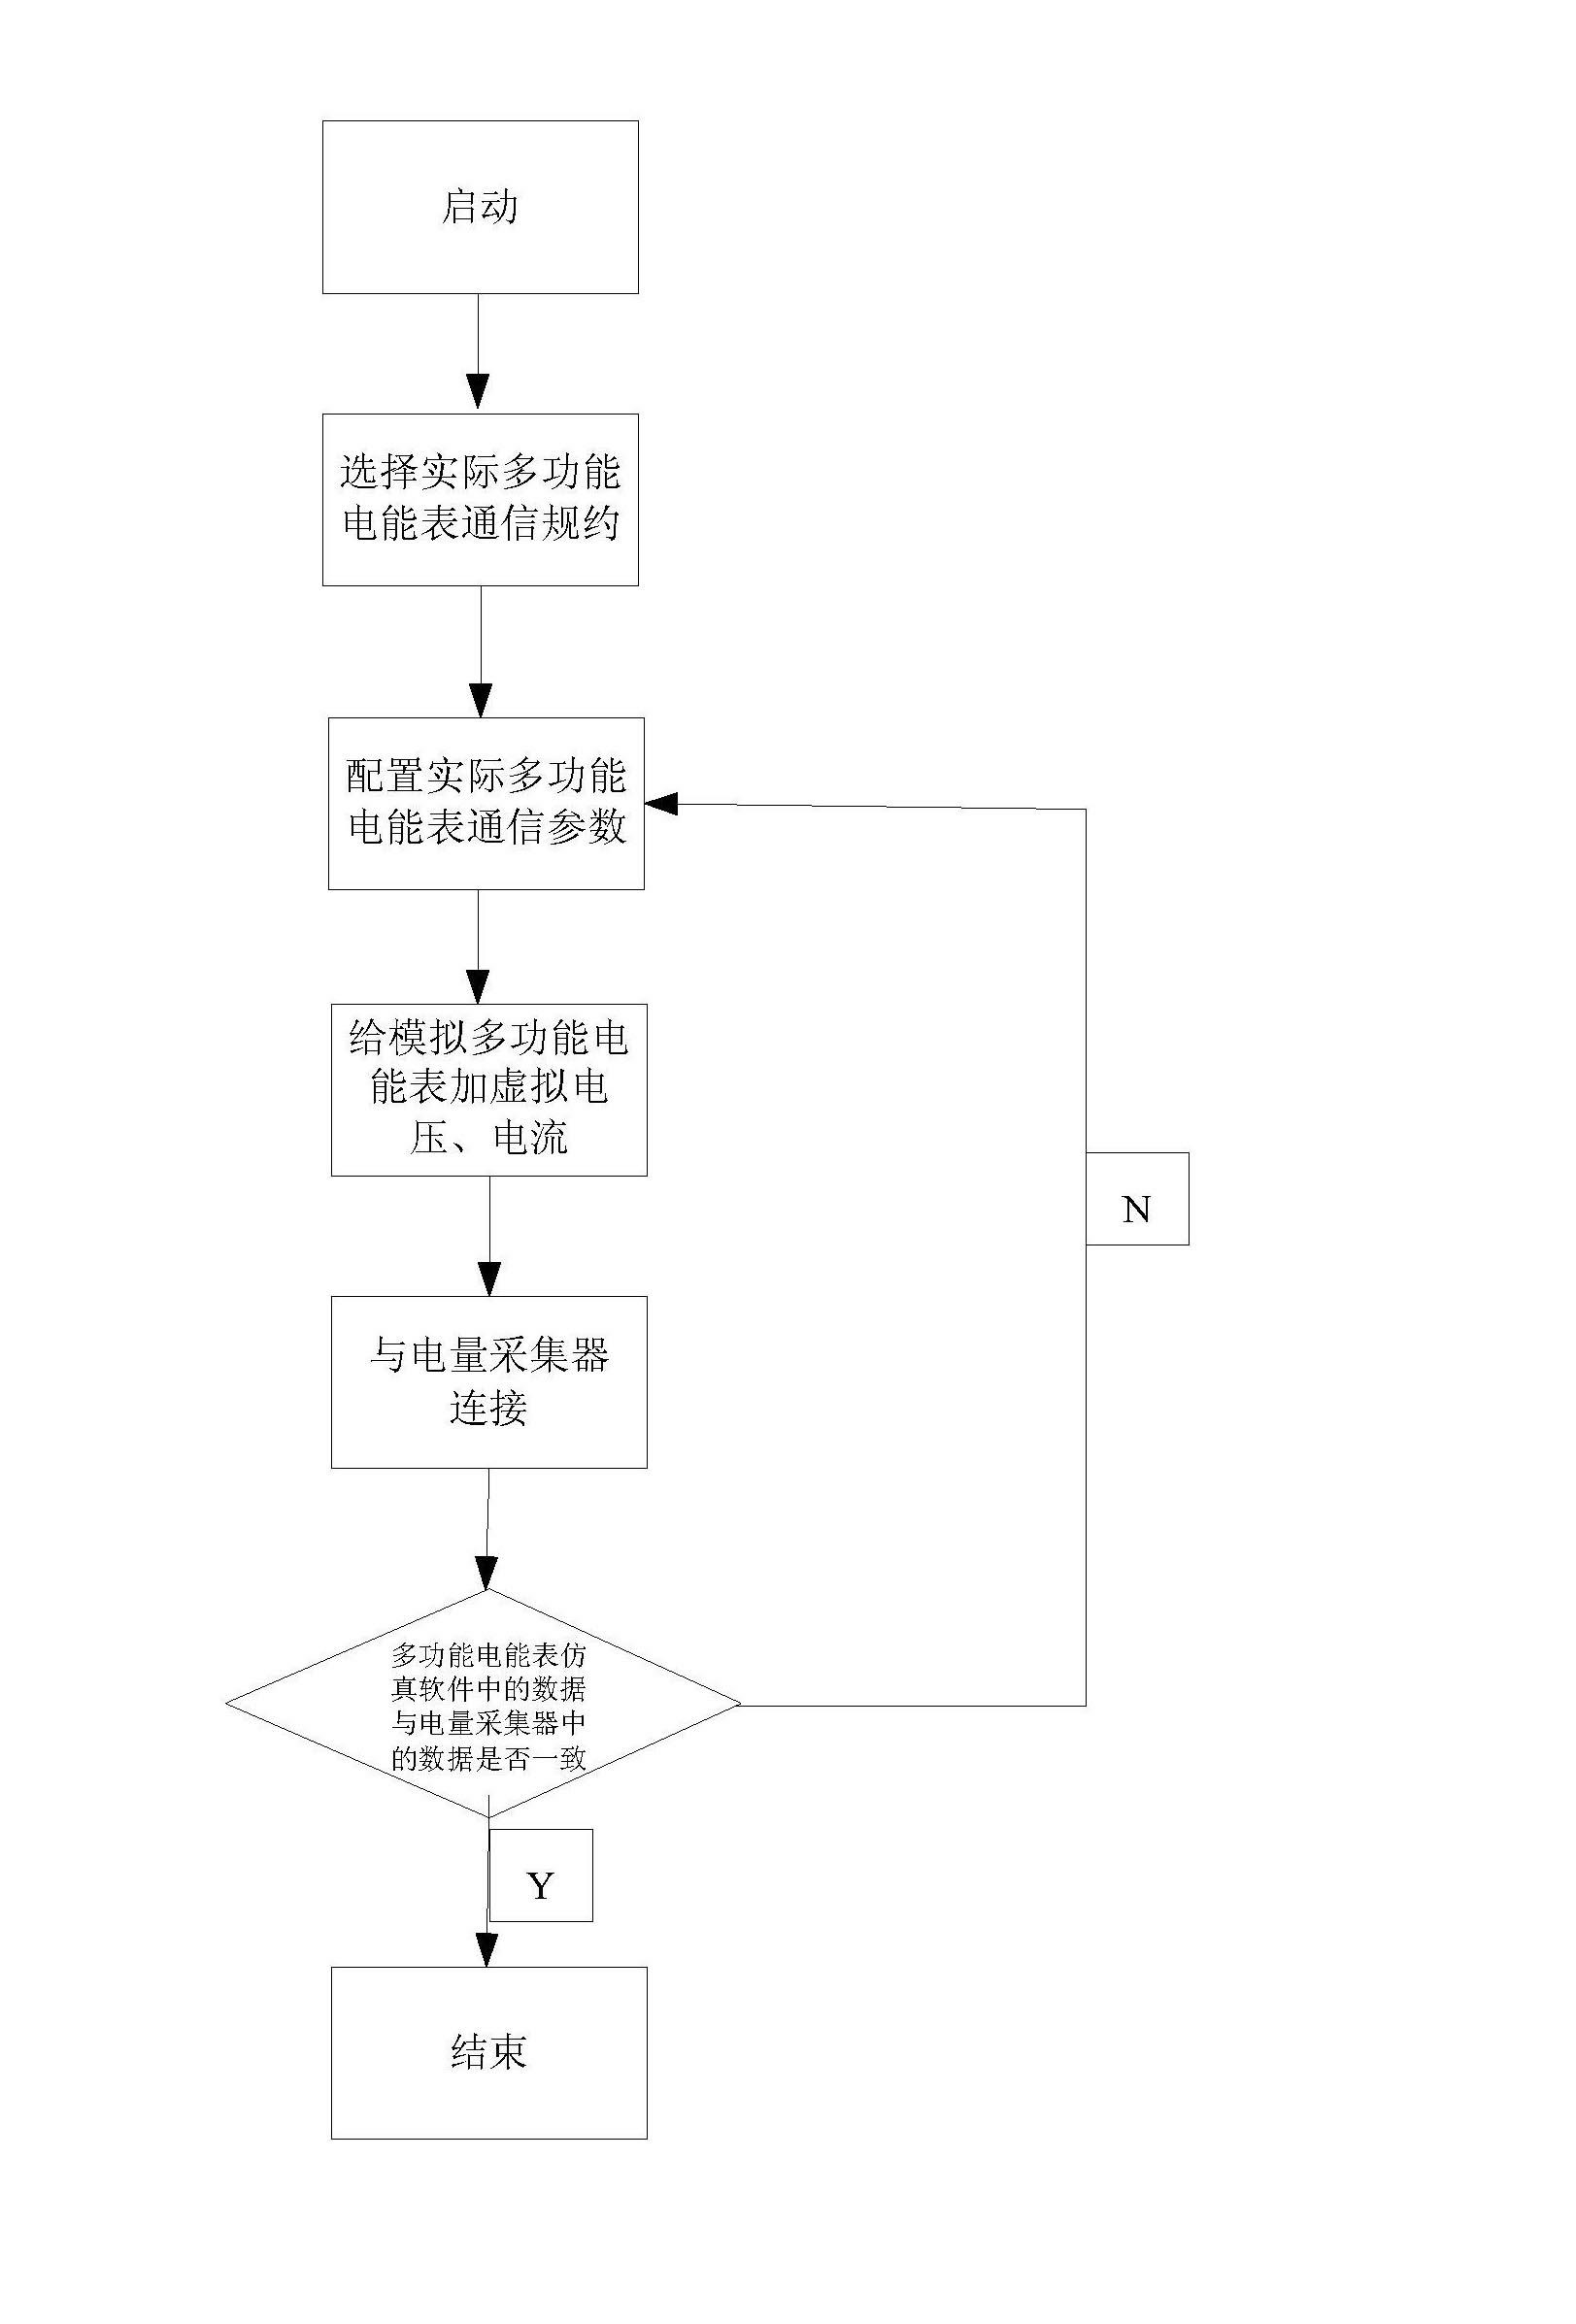 Method for conducting communication failure troubleshooting by utilizing multifunctional electric energy meter simulation software